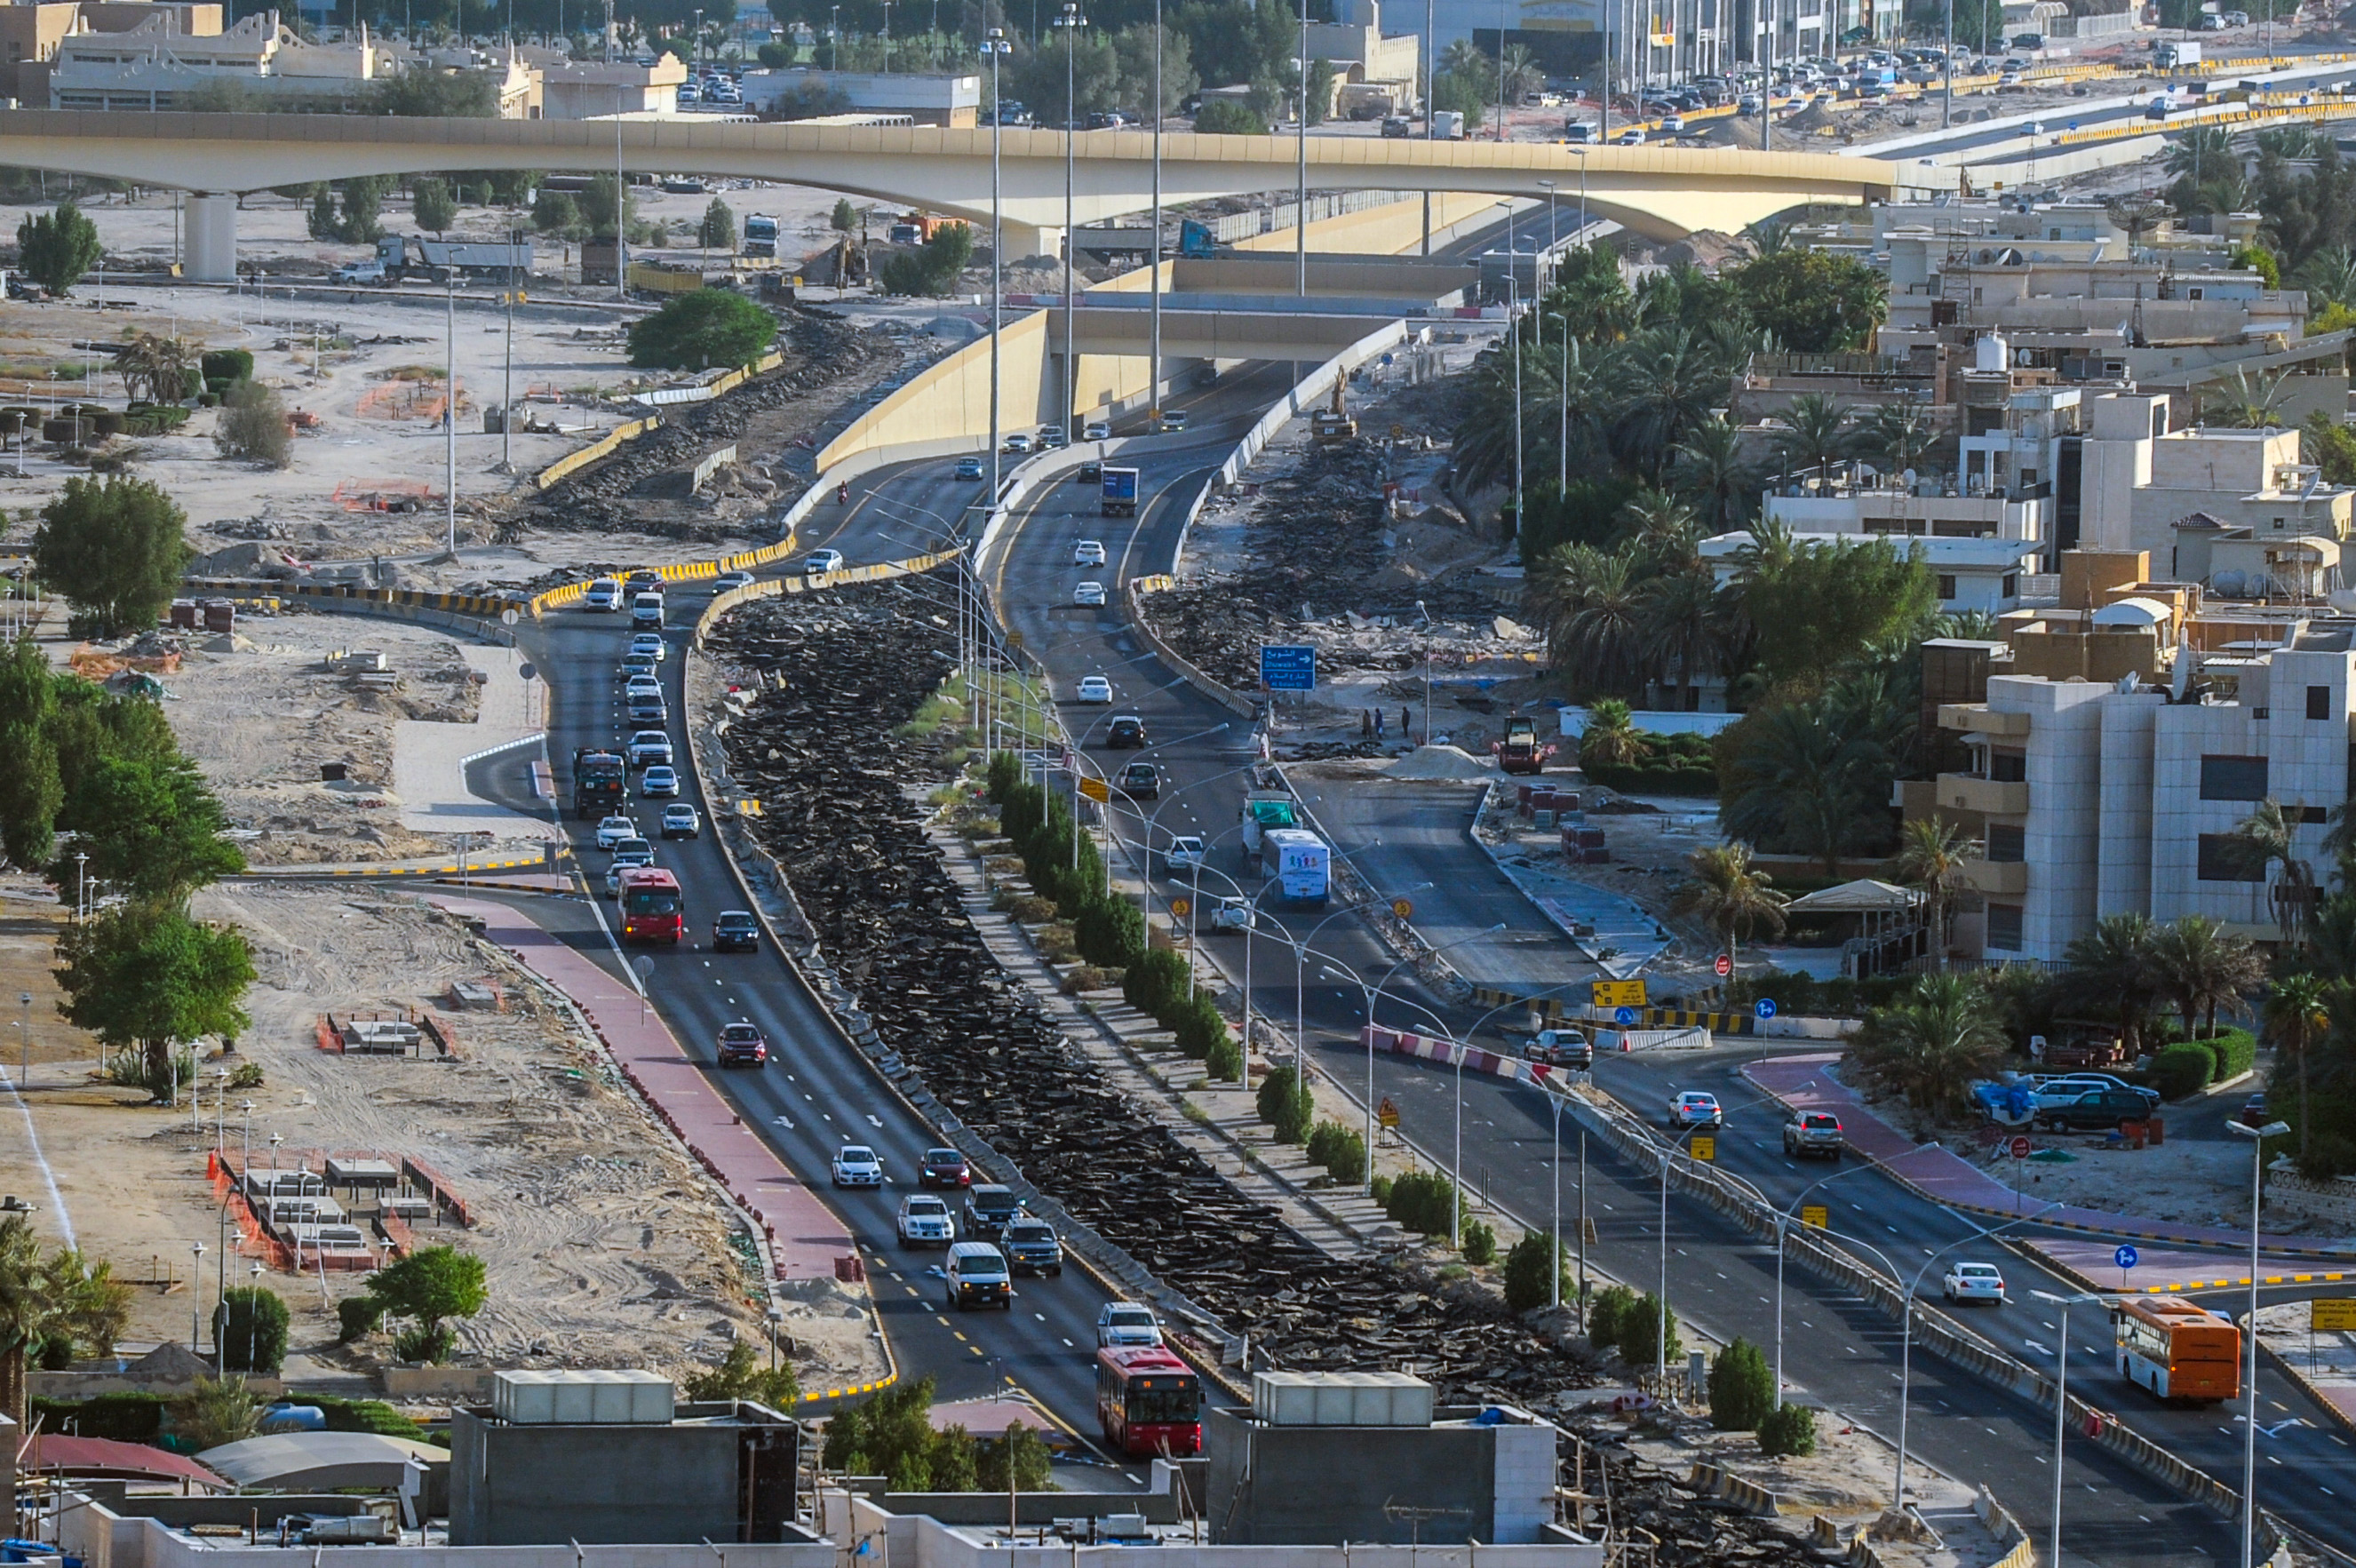 New flyovers, tunnels 'hit the road' as part of 2035 vision